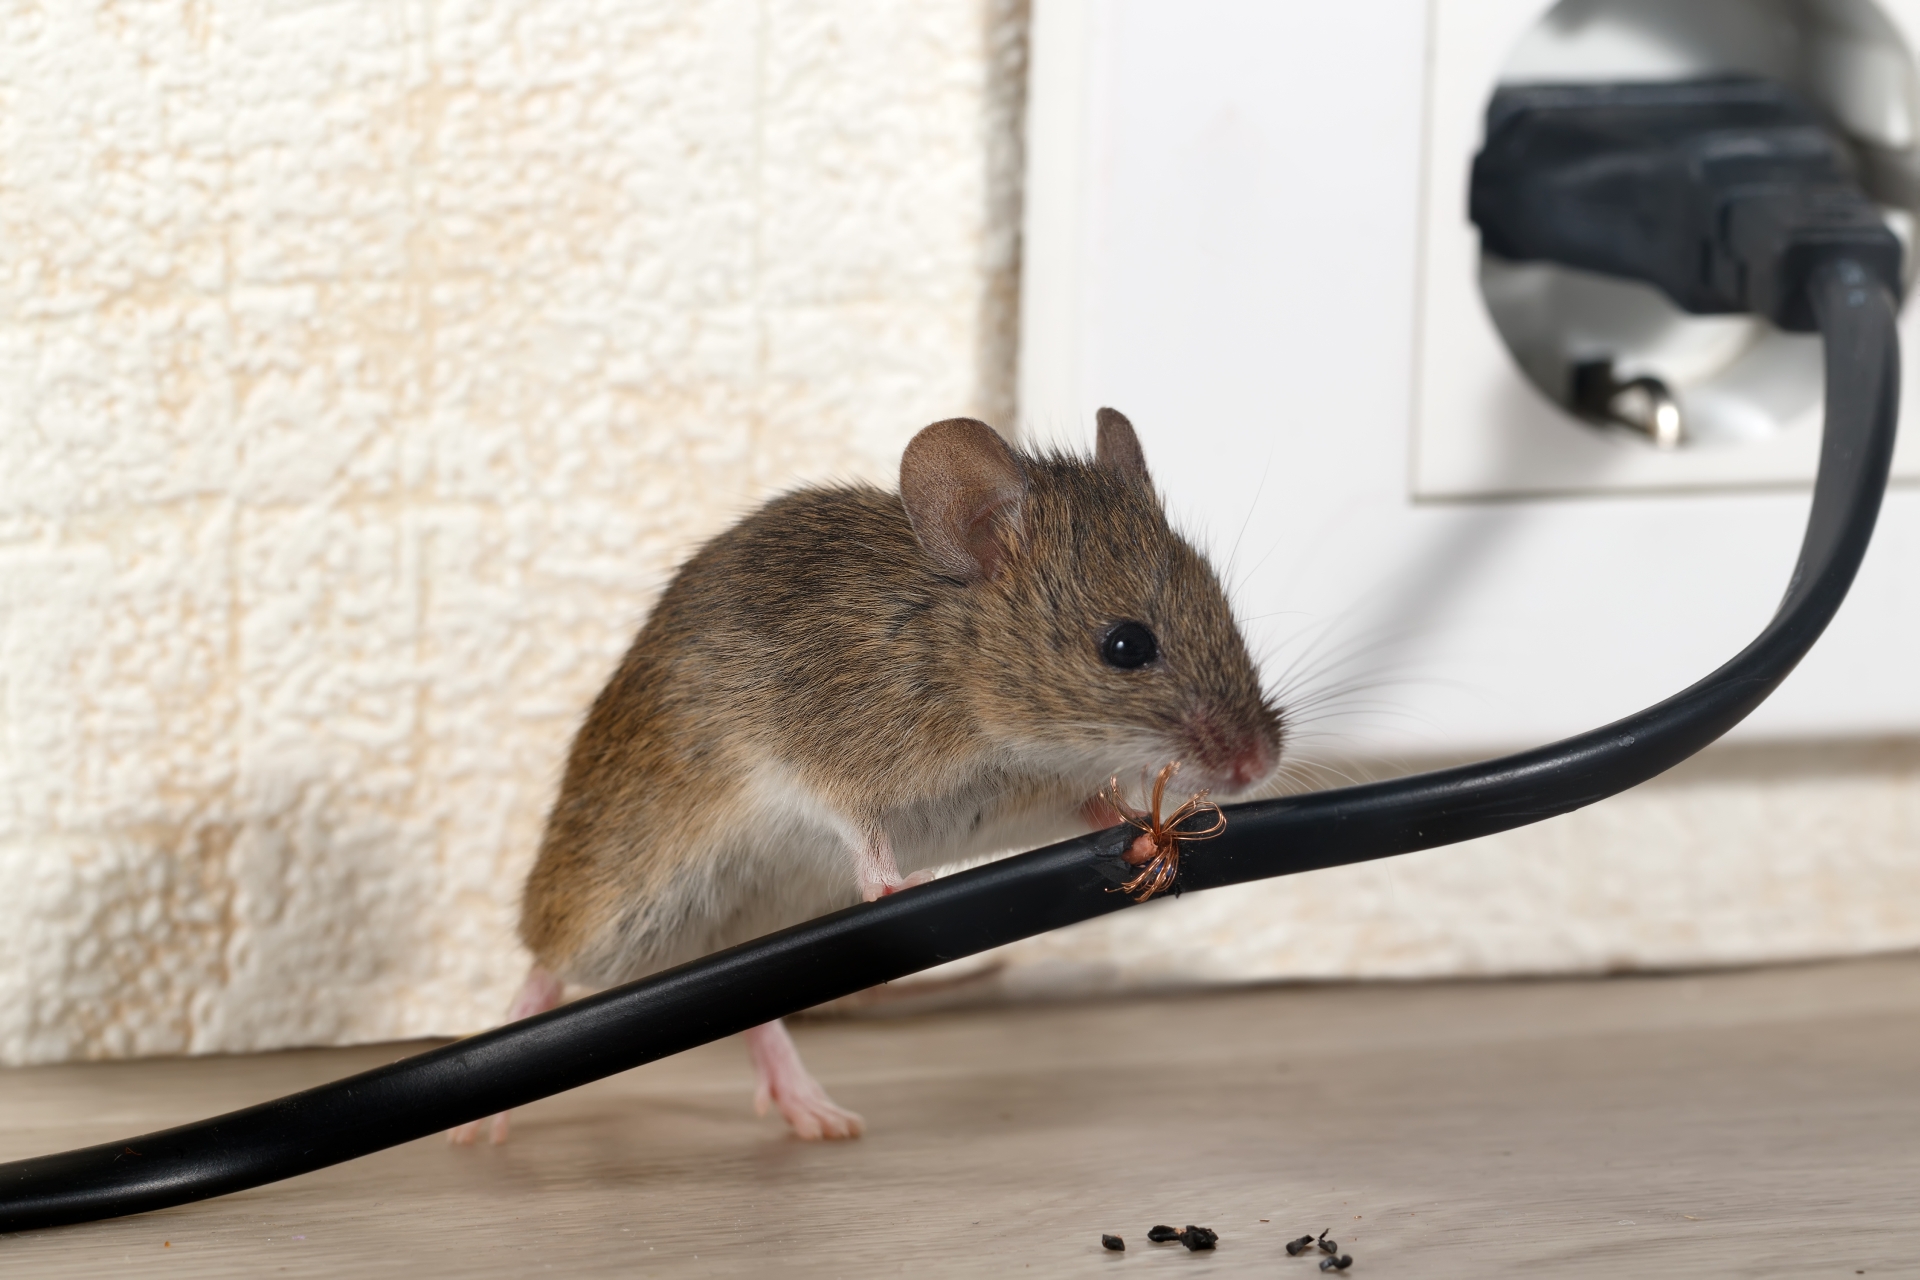 Mice Infestation, Pest Control in Finsbury Park, Manor House, N4. Call Now 020 8166 9746